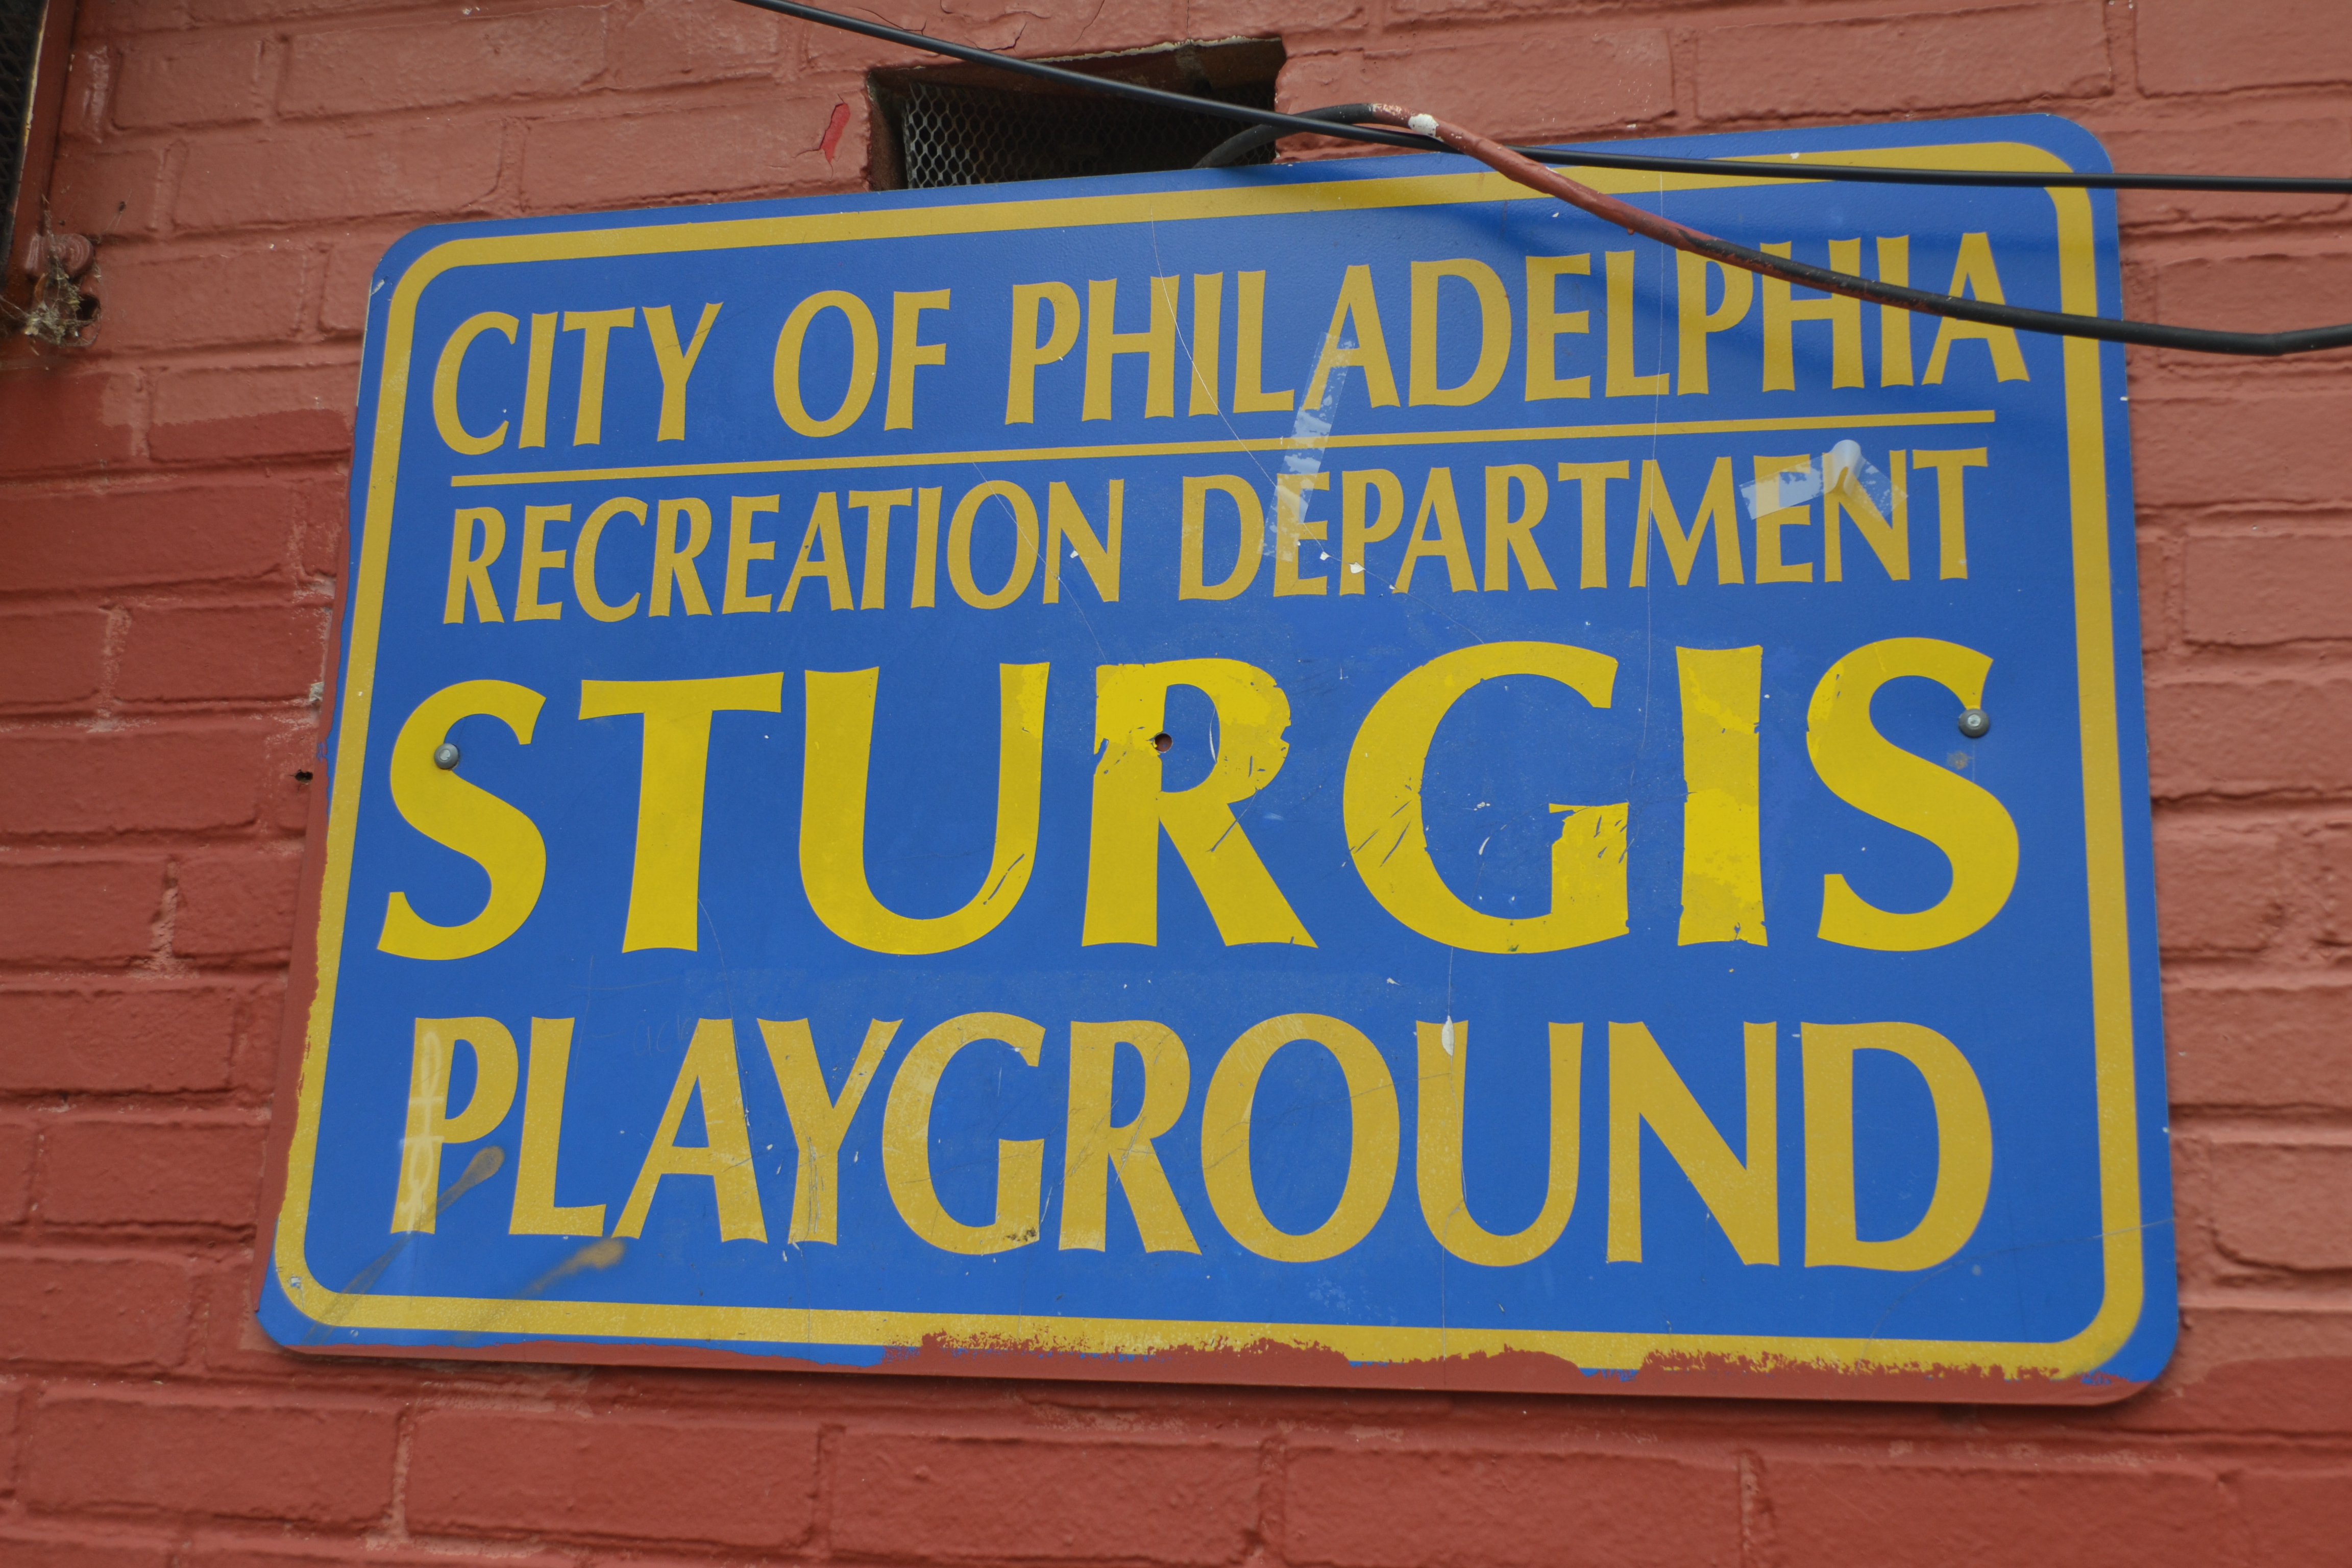 Sturgis Playground will get a new 5,090 square foot recreation center designed by SMP Architects